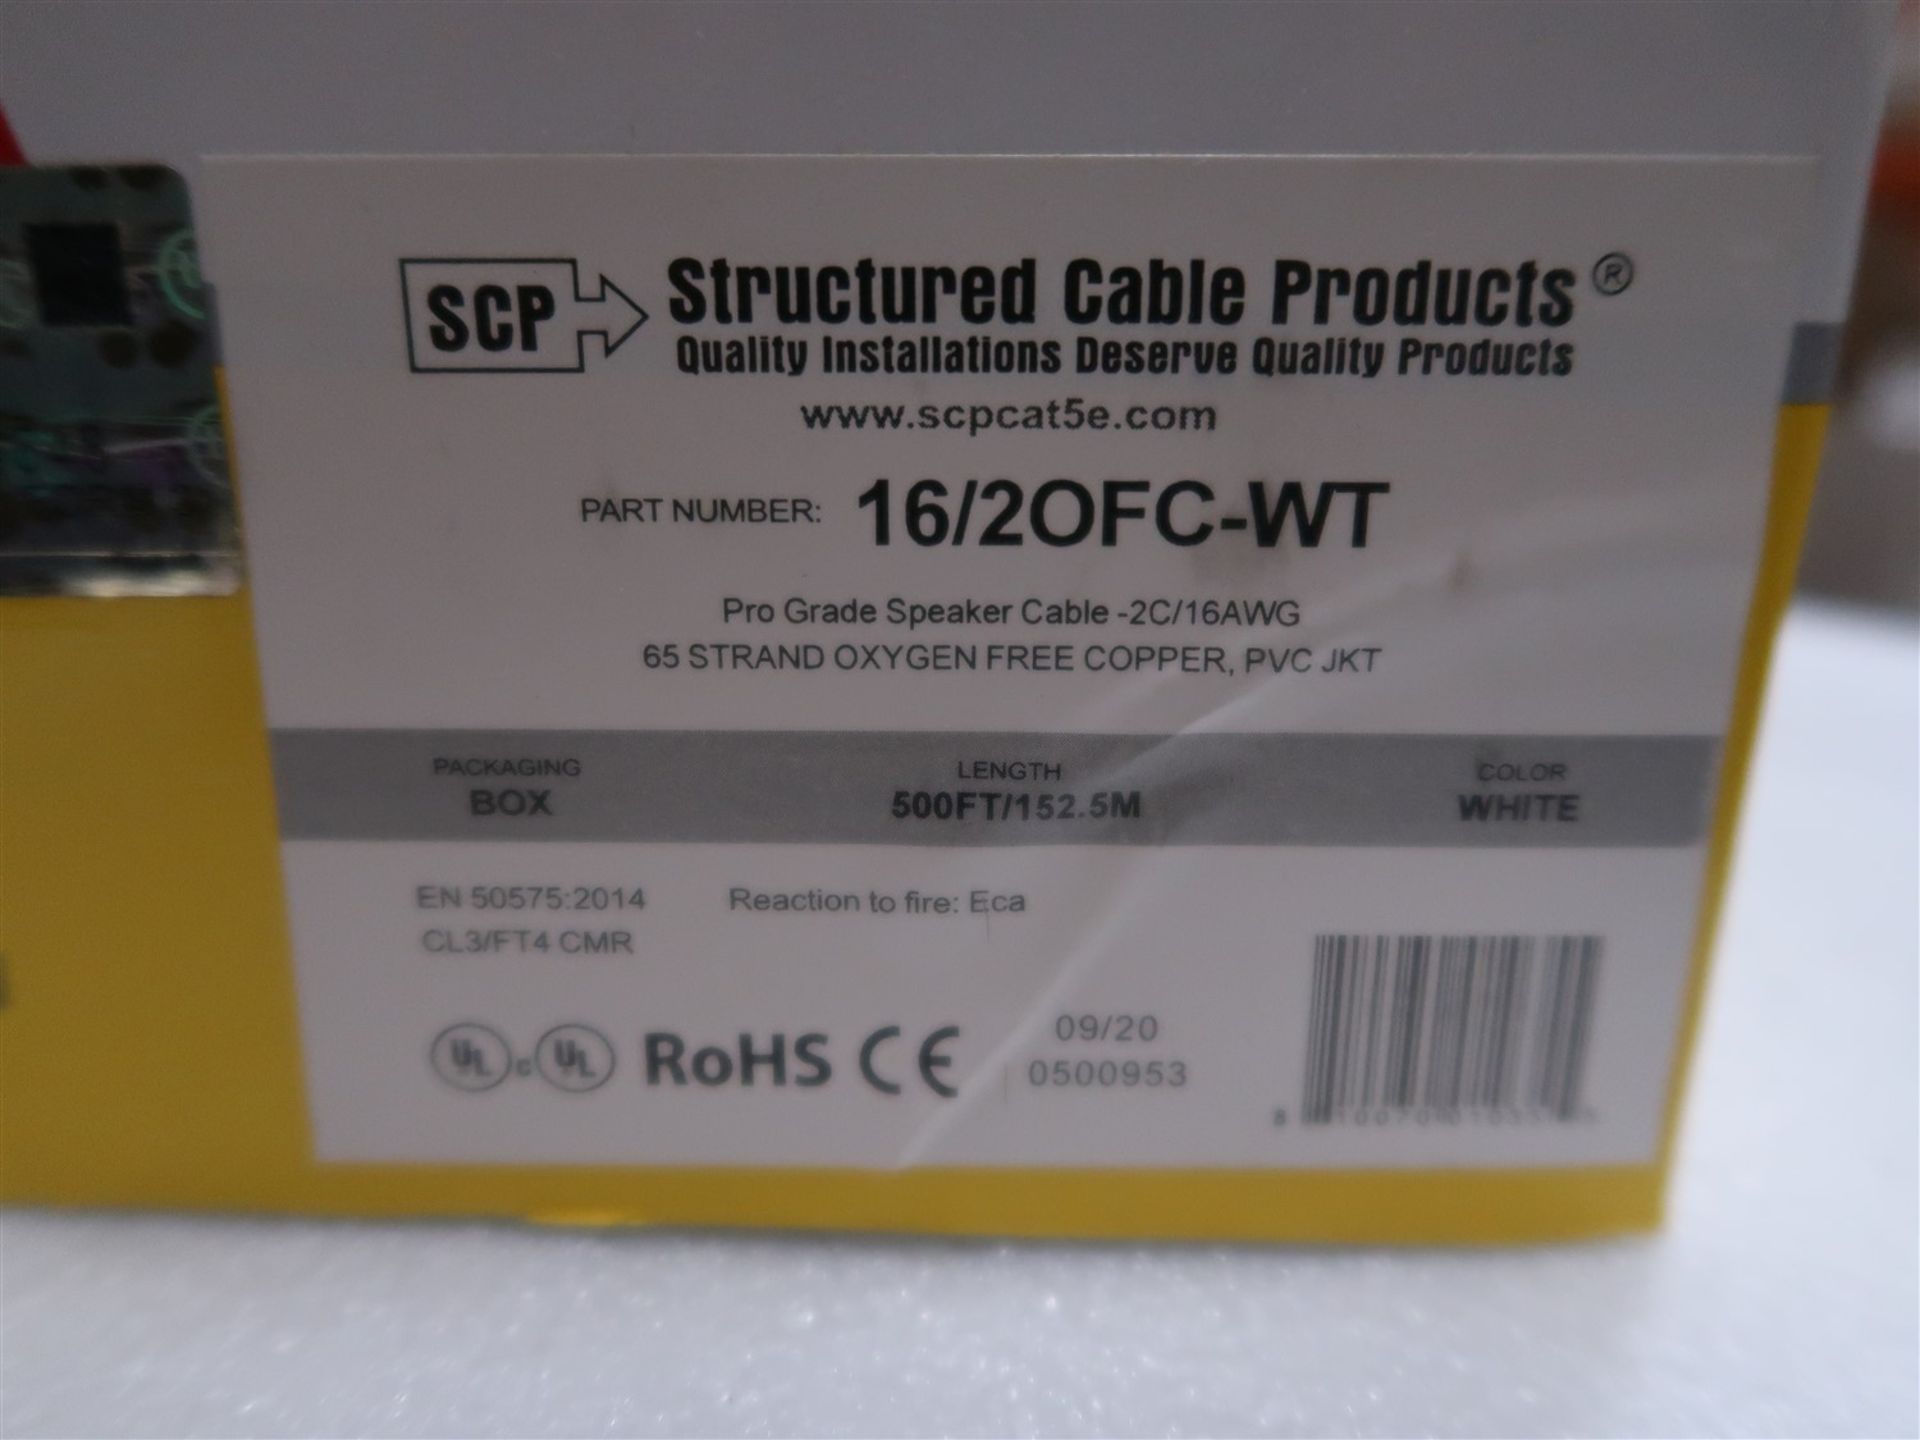 BOX OF SCP 16/20 FC-WT PRO GRADE SPEAKER CABLE, 2C/16 AWG, 65 STRAND OXYGEN FREE COPPER PVC JKT - Image 2 of 2